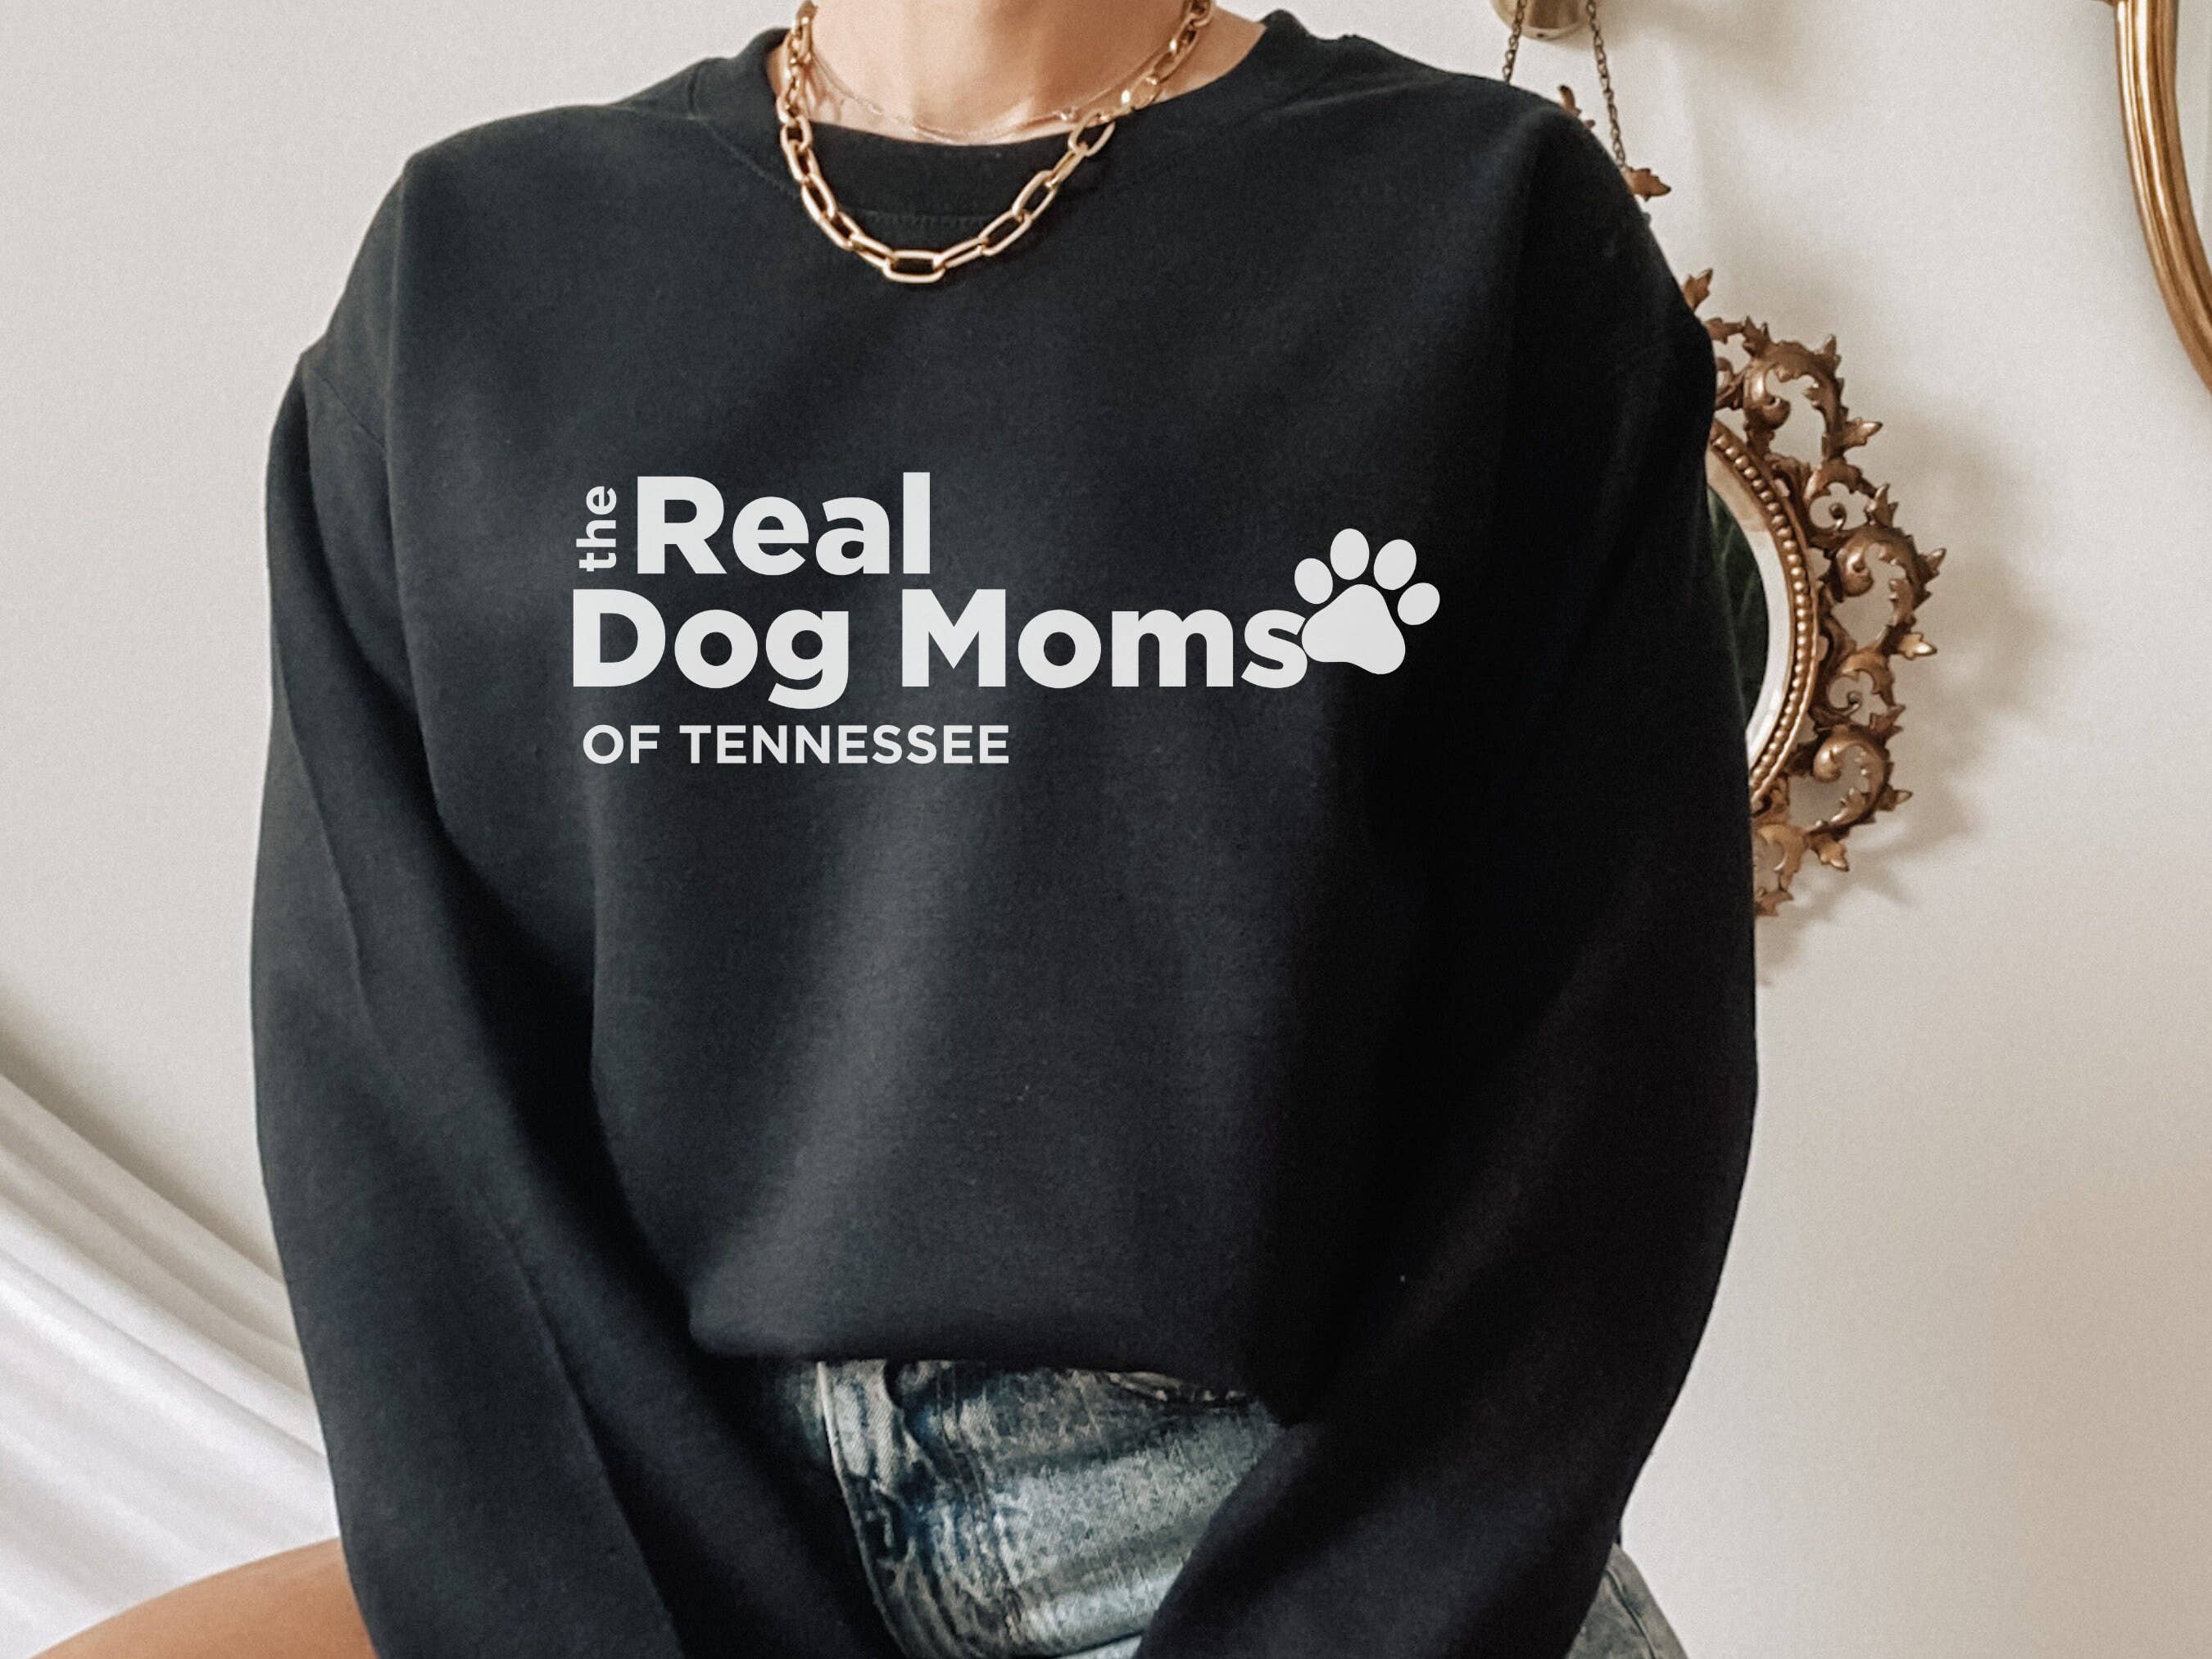 Dog Mom Apparel - The Real Dog Moms Of Tennessee Sweatshirt